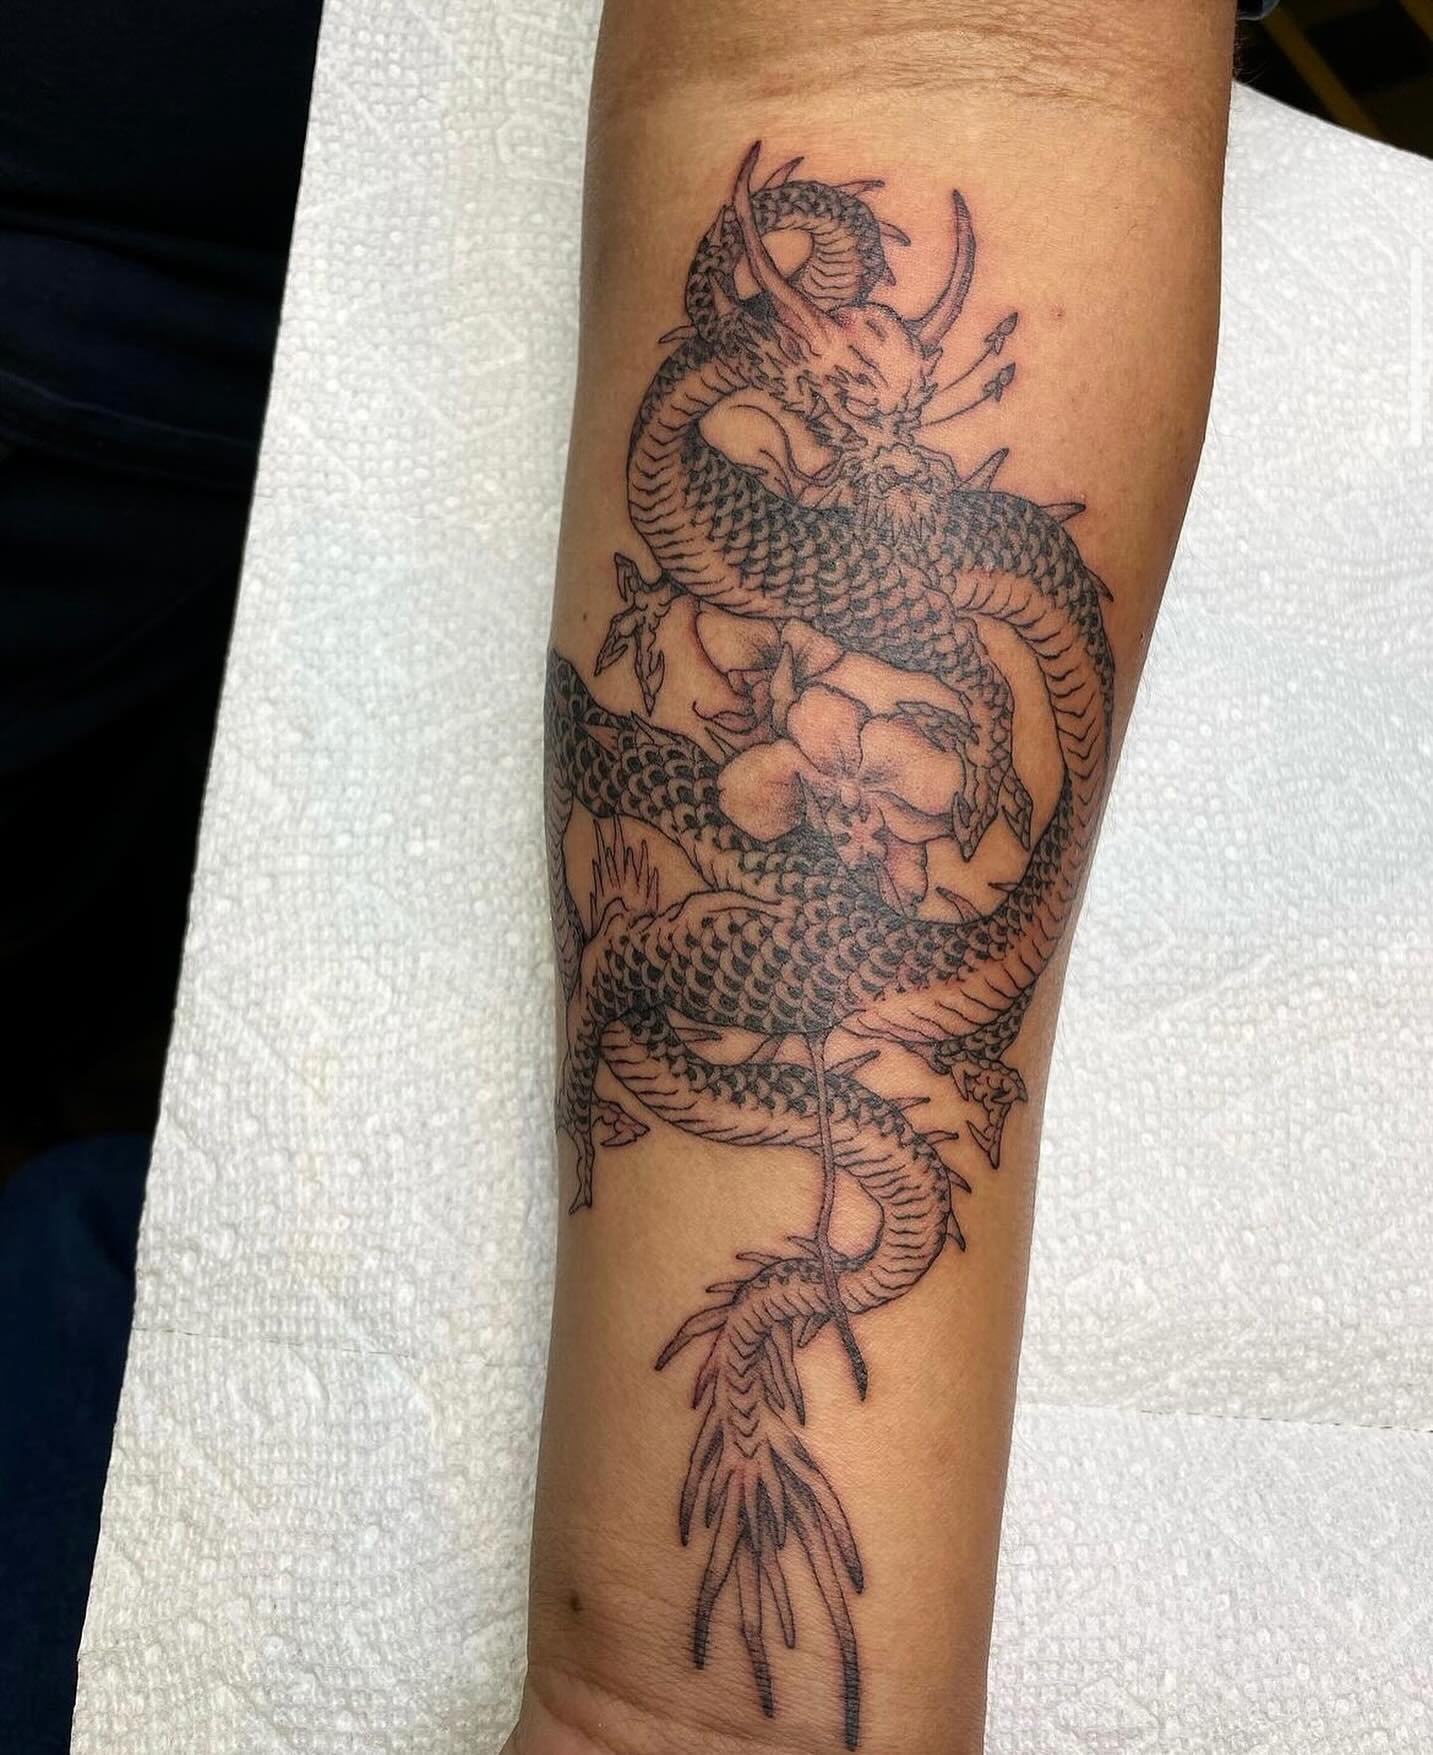 @space.one_ with this amazing Chinese dragon 🔥
.
Call the shop to book with @space.one_ 
.
720.904.8904
.
Using #dynamicink #bishoprotary #blackclaw